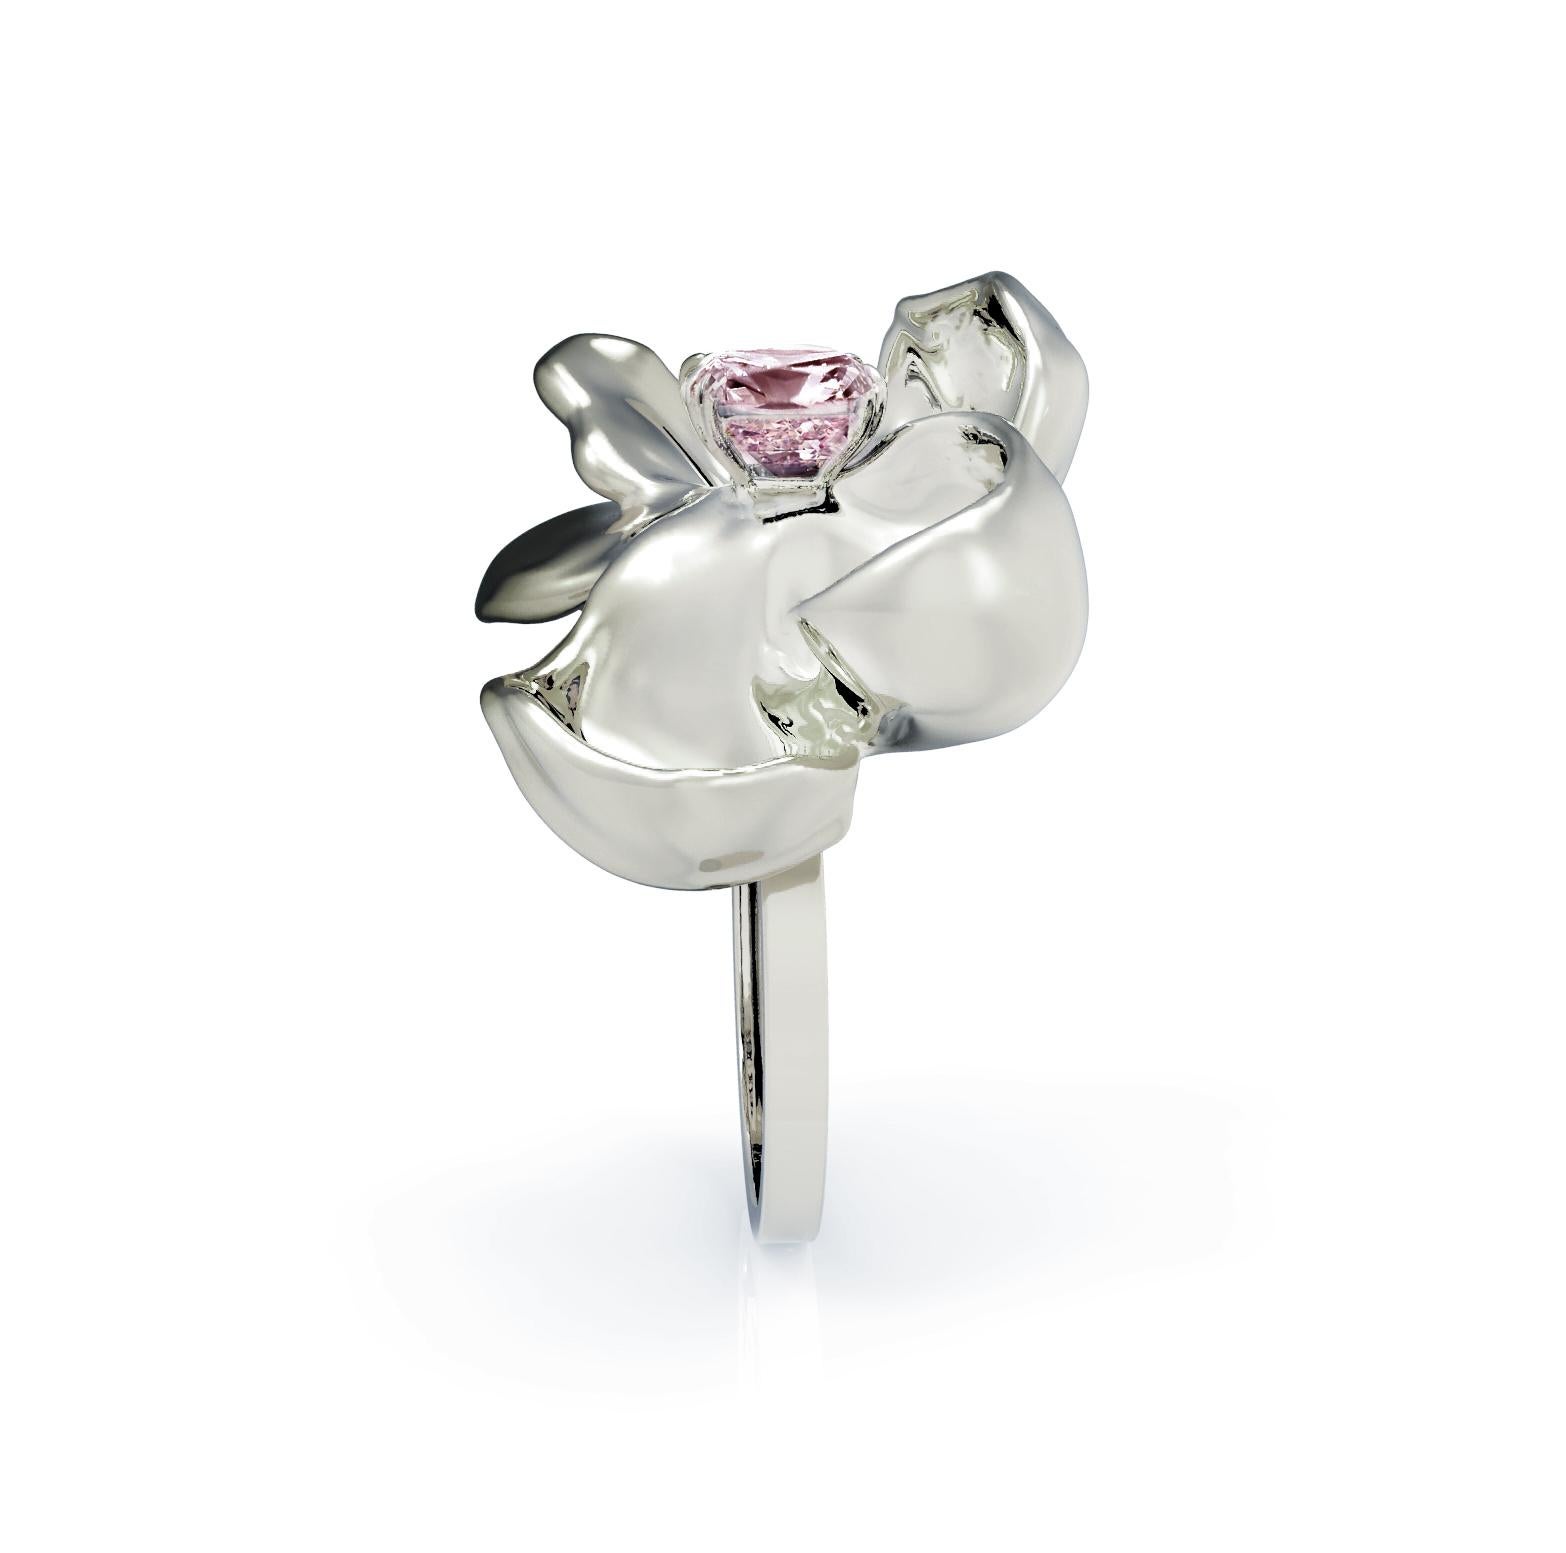 18 Karat White Gold Contemporary Cocktail Ring with Berry Spinel by Artist For Sale 5